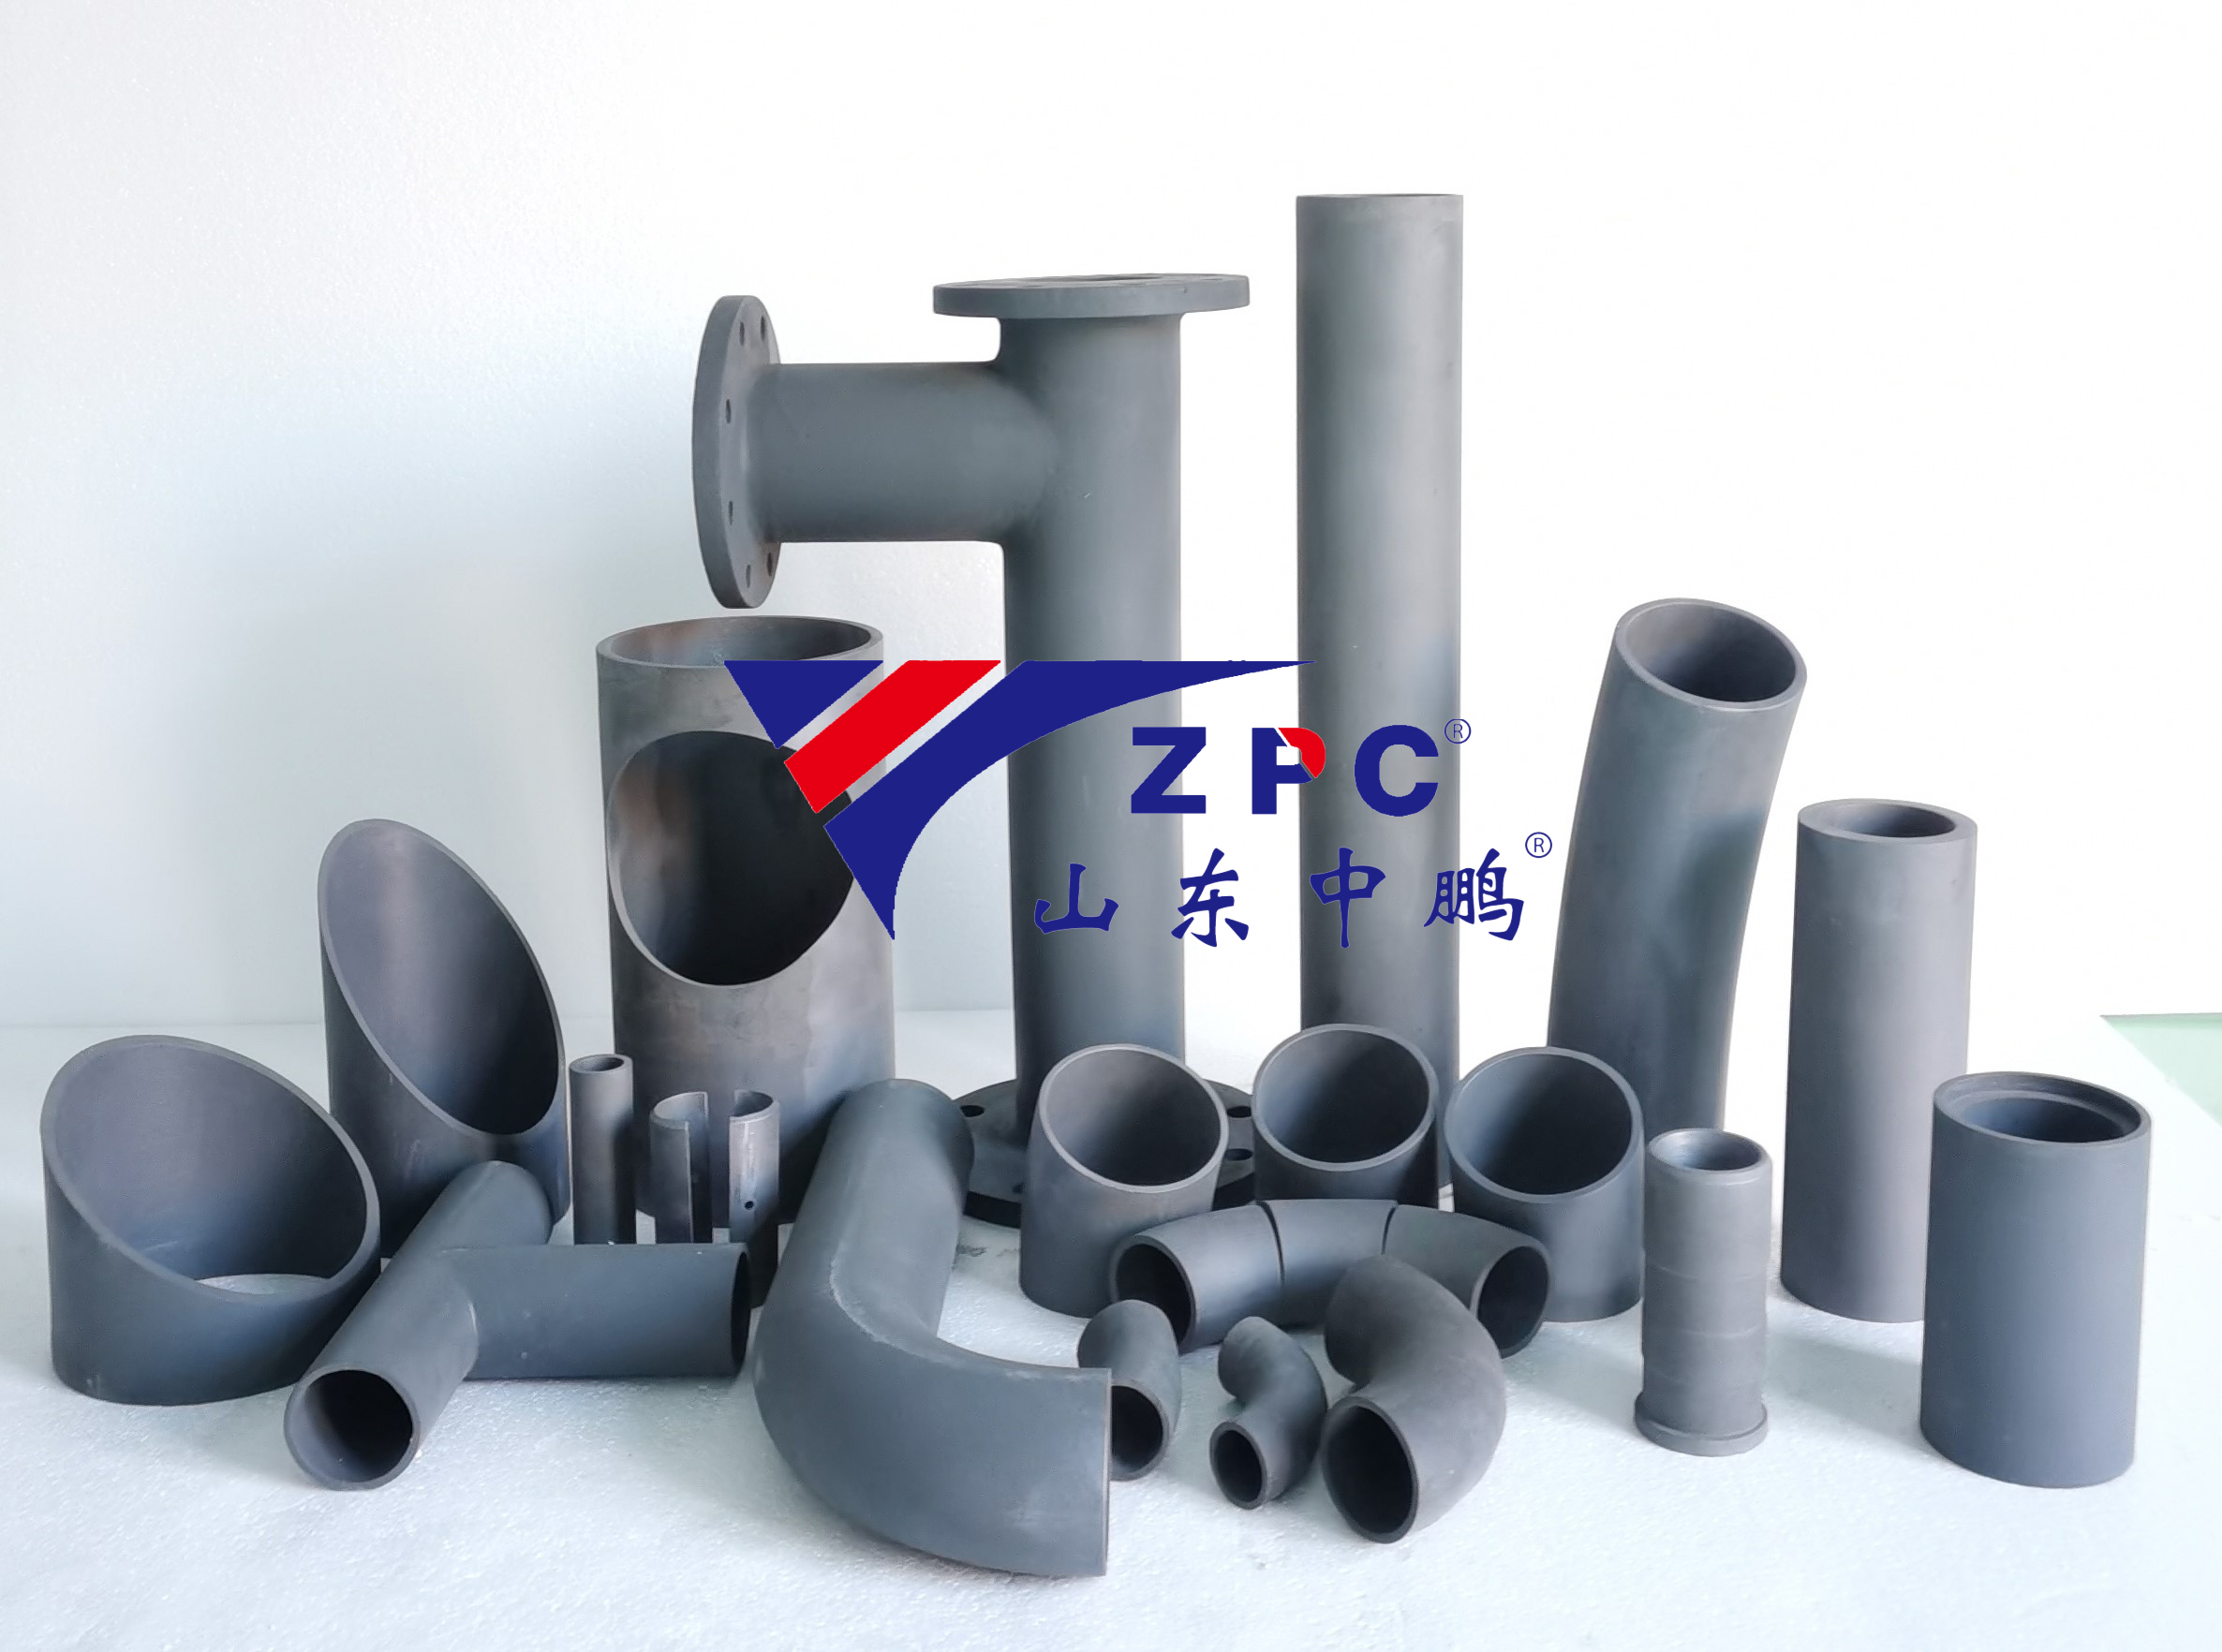 Wear resistant and corrosion resistant silicon carbide ceramic pipe